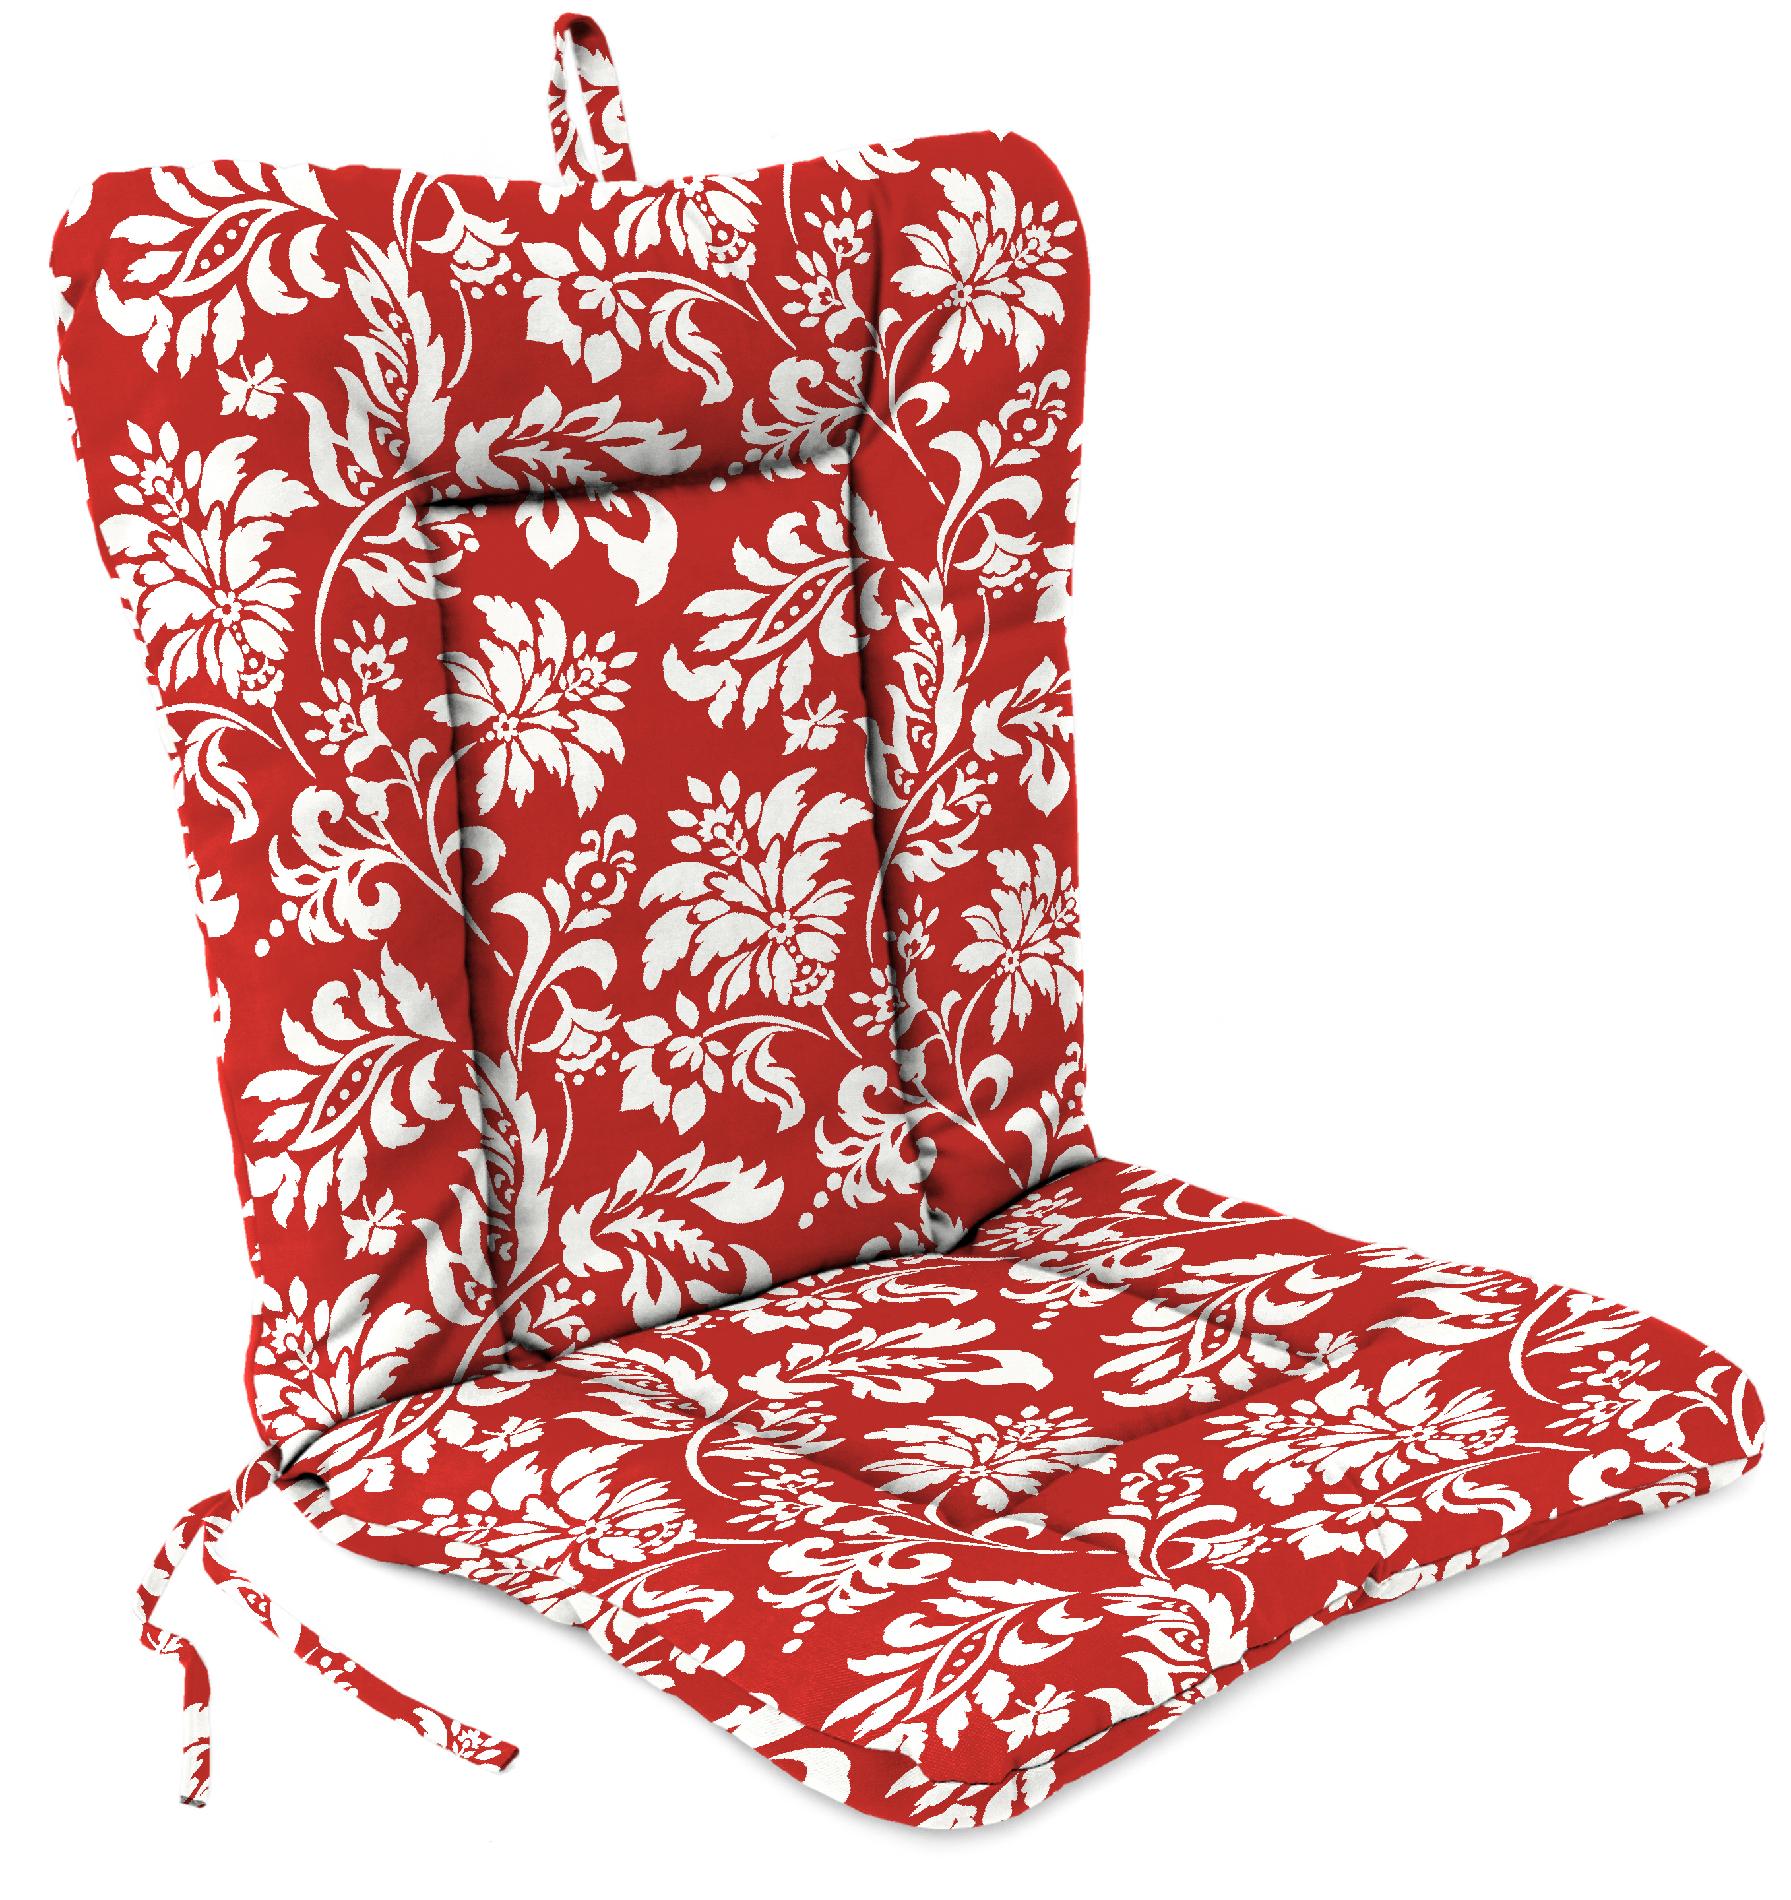 Dinalounge Chair Cushion in Wexford Berry